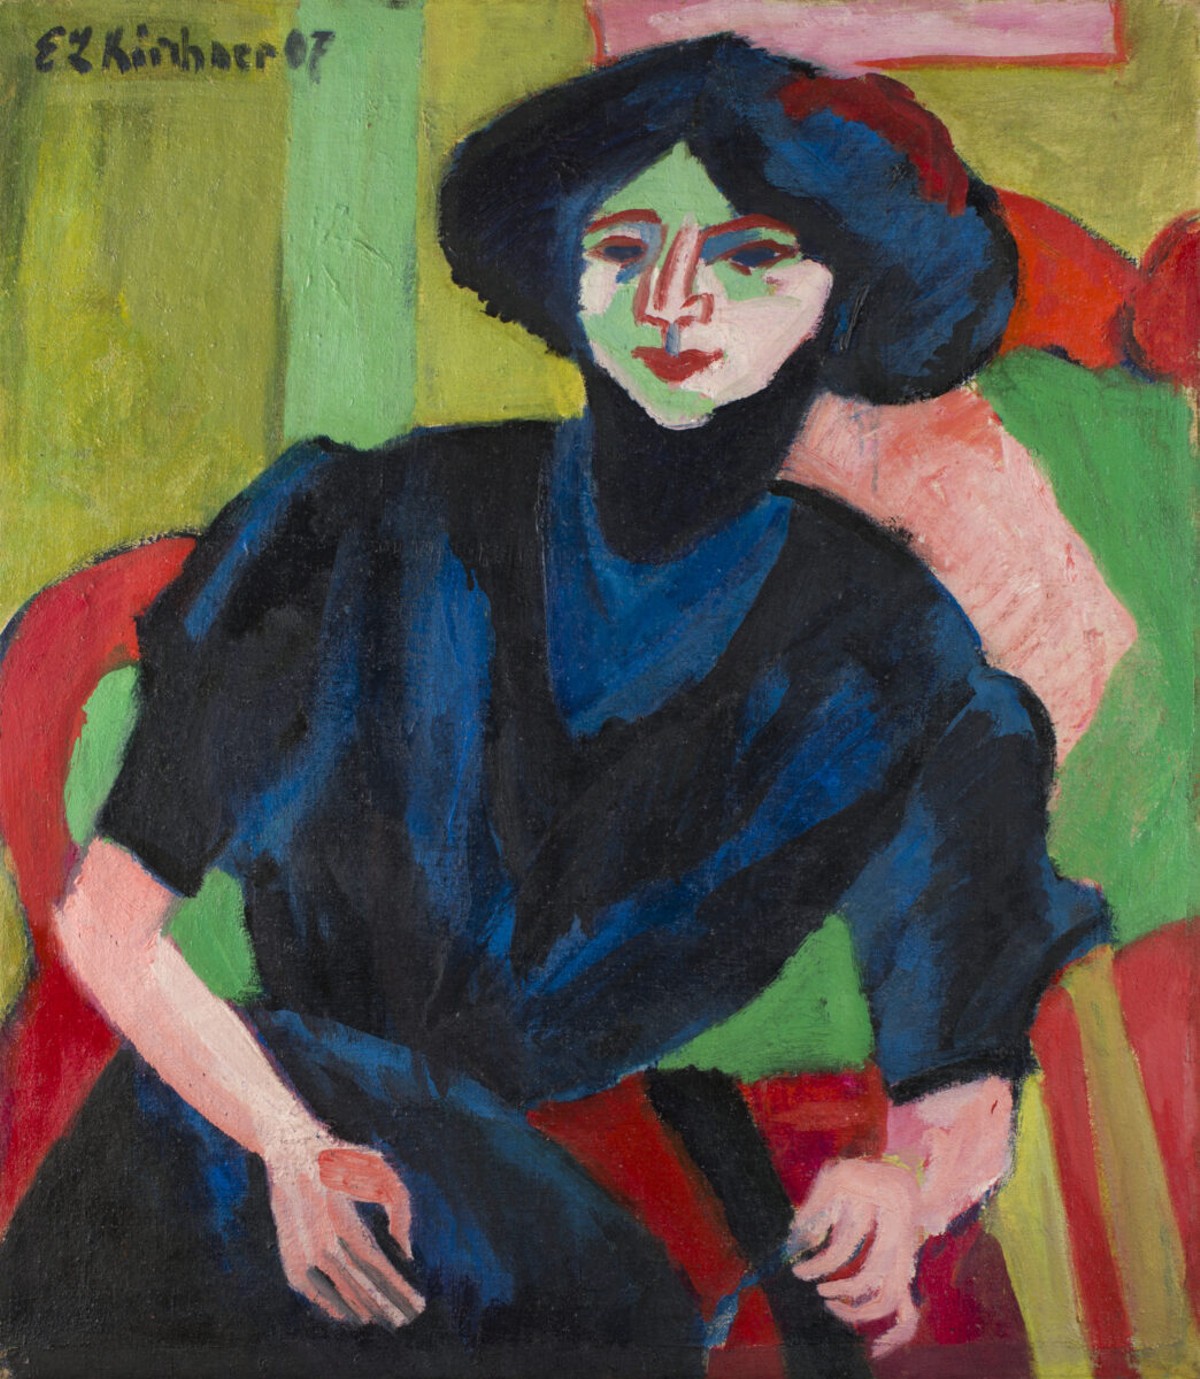 Concealed Layers: Uncovering Expressionist Paintings is currently on view in the Caro Nichols Holmes Gallery 214 and Sherry and Gary Wolff Gallery 215 through August 4.